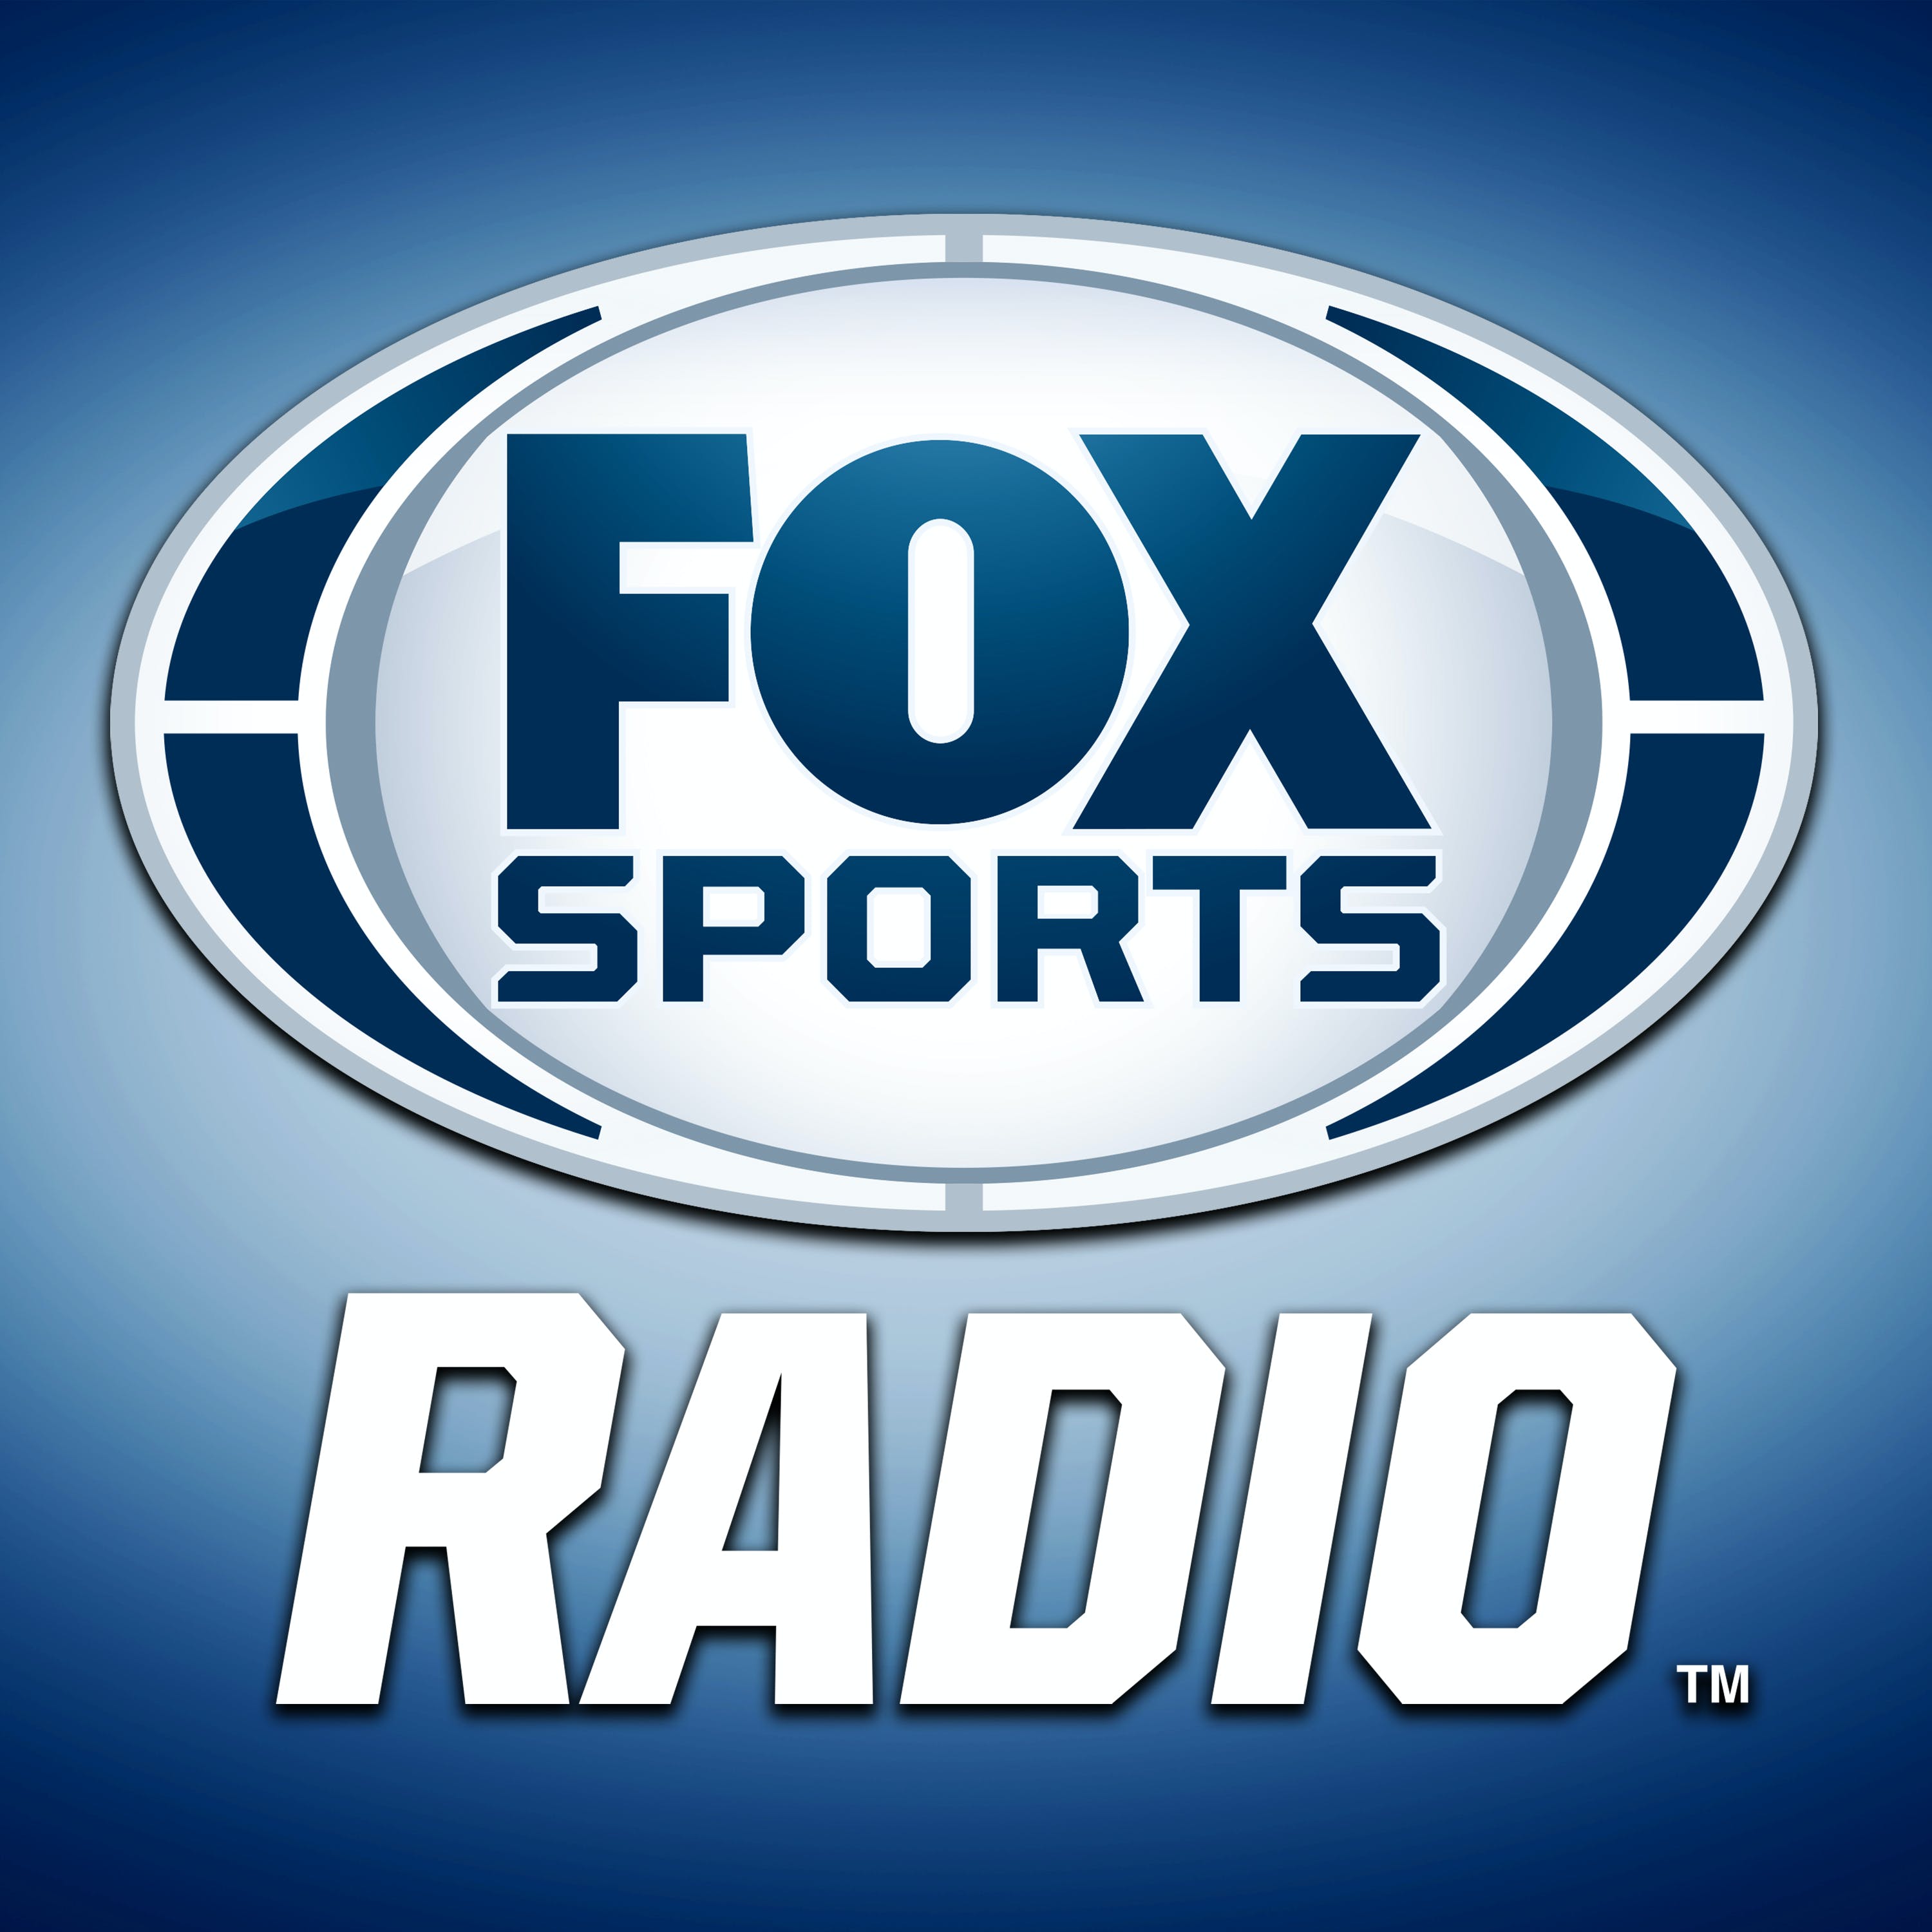 11/14/2020 - FOX Football Saturday with Arnie Spanier and Aaron Torres